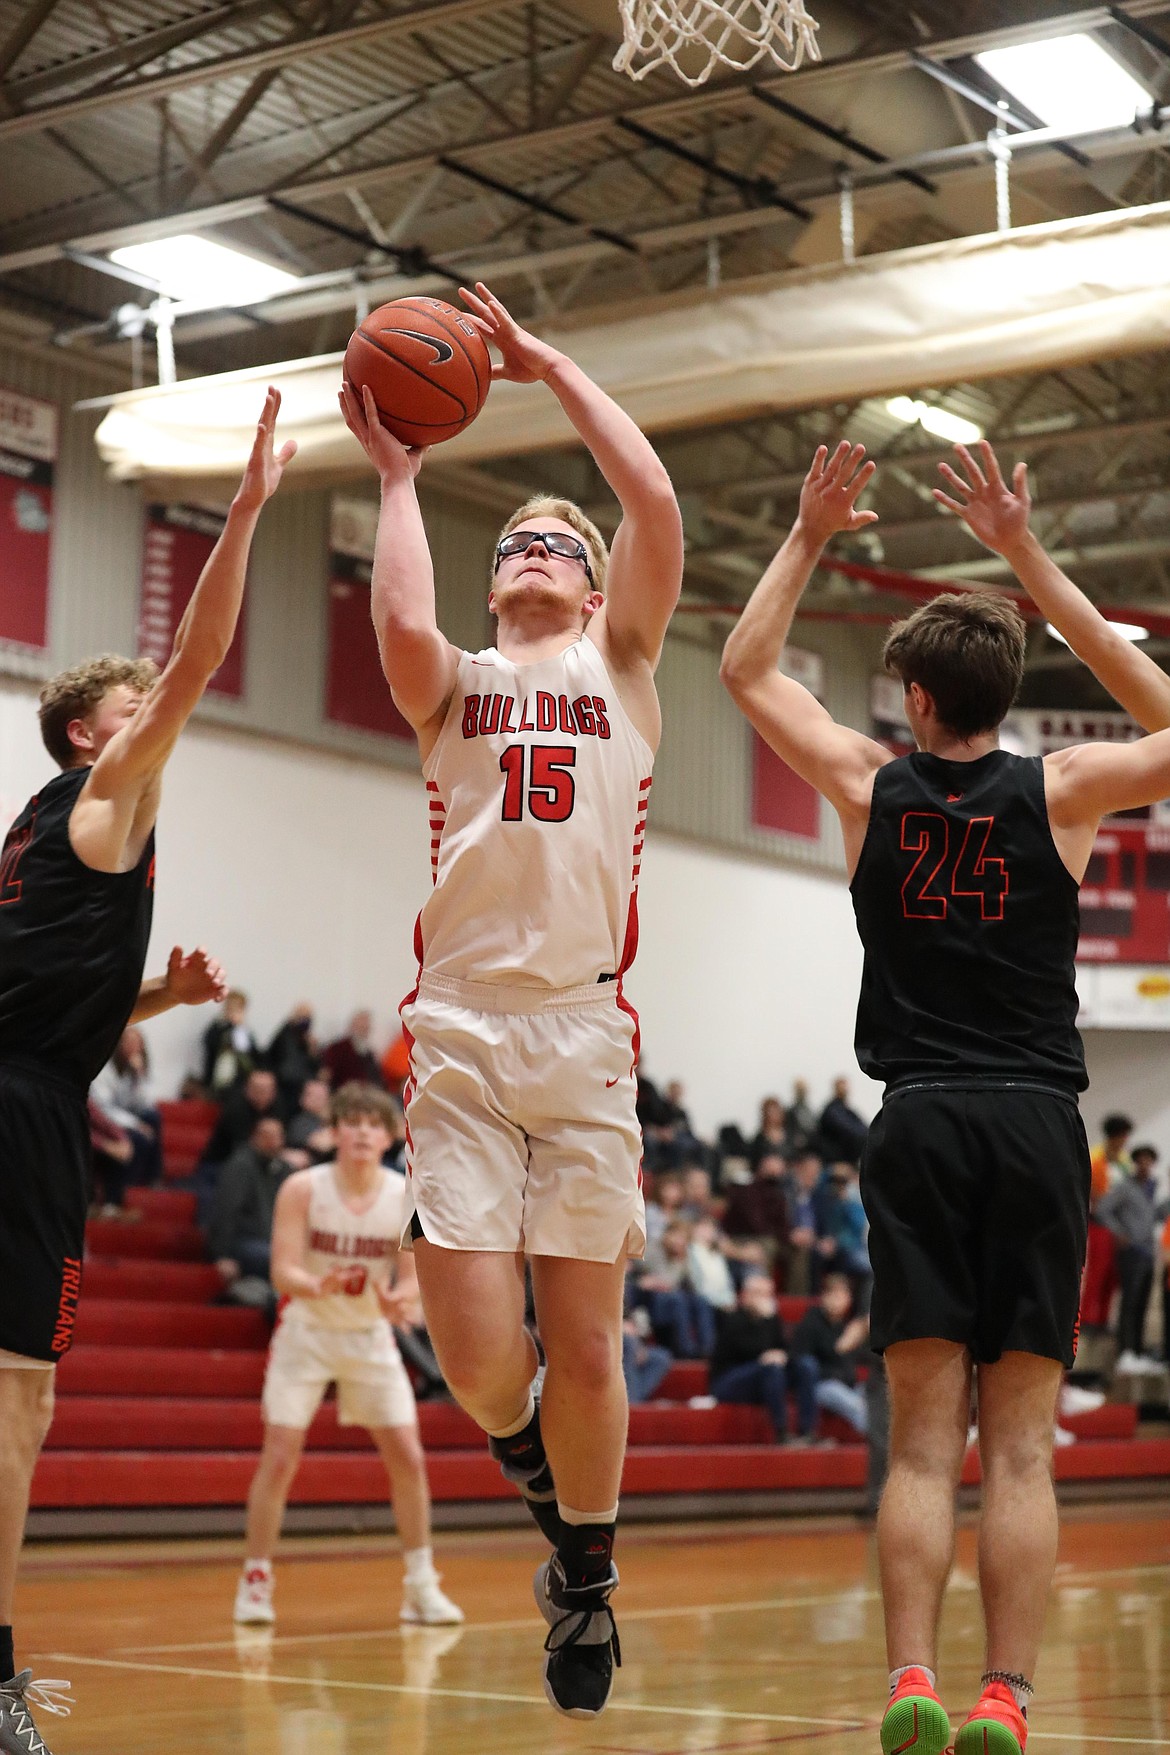 Ethan Butler attempts a layup during the fourth quarter of Wednesday's game.